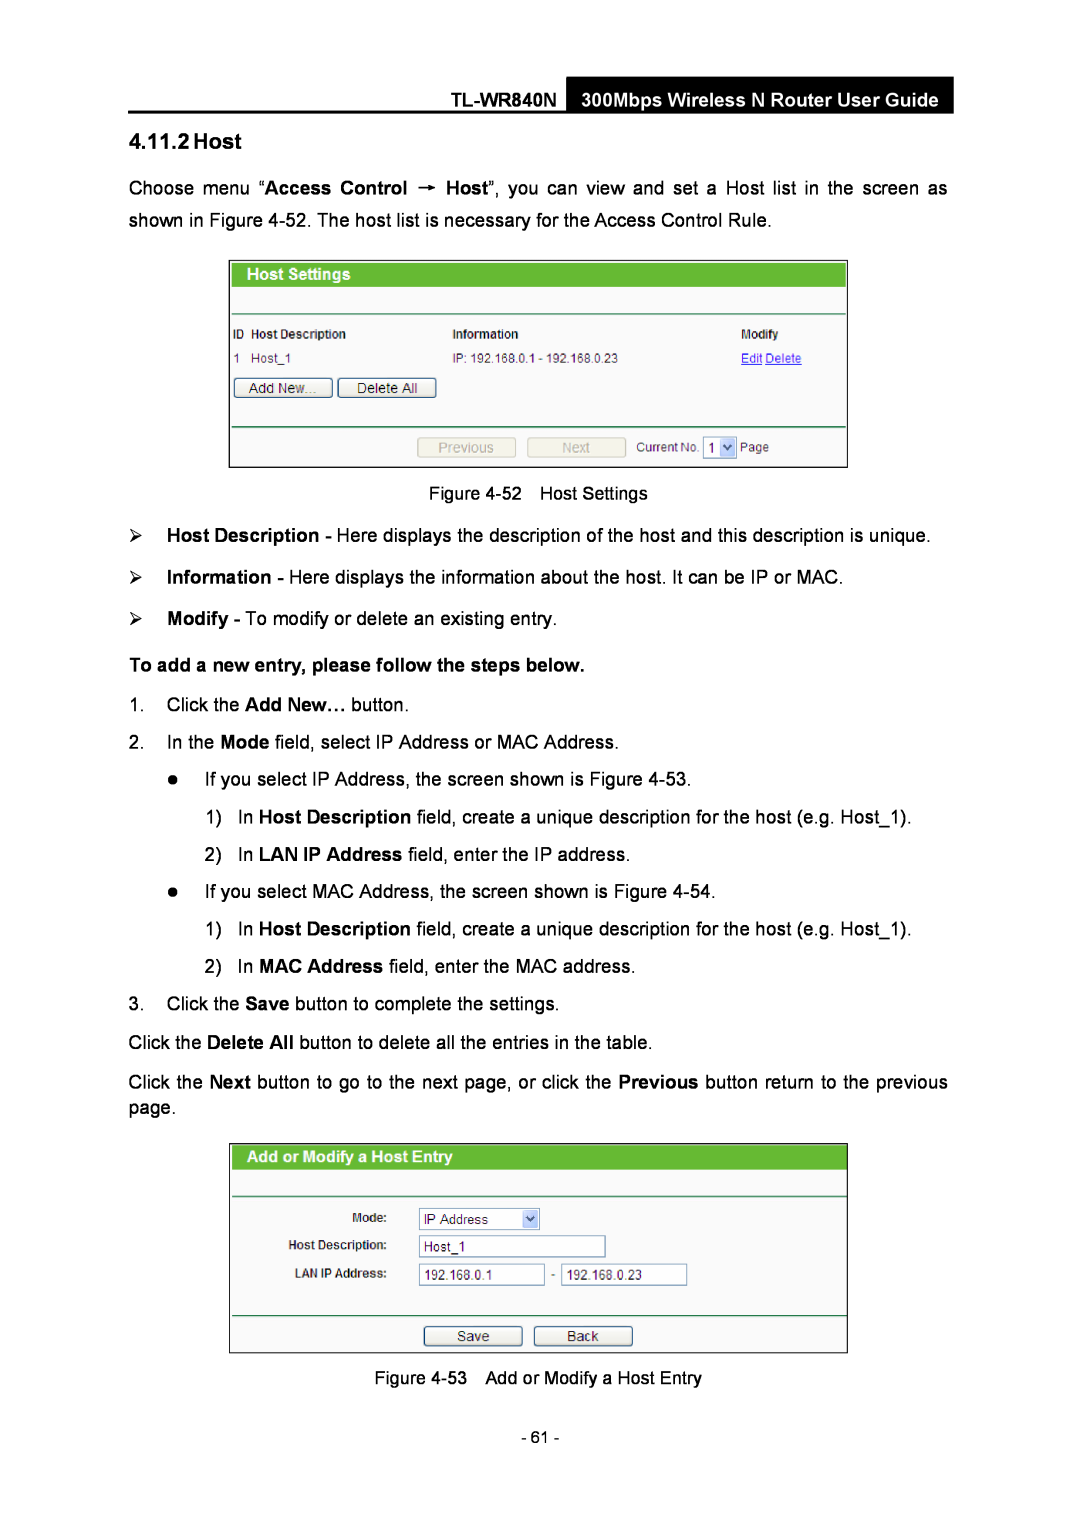 TP-Link manual Host, TL-WR840N 300Mbps Wireless N Router User Guide, To add a new entry, please follow the steps below 